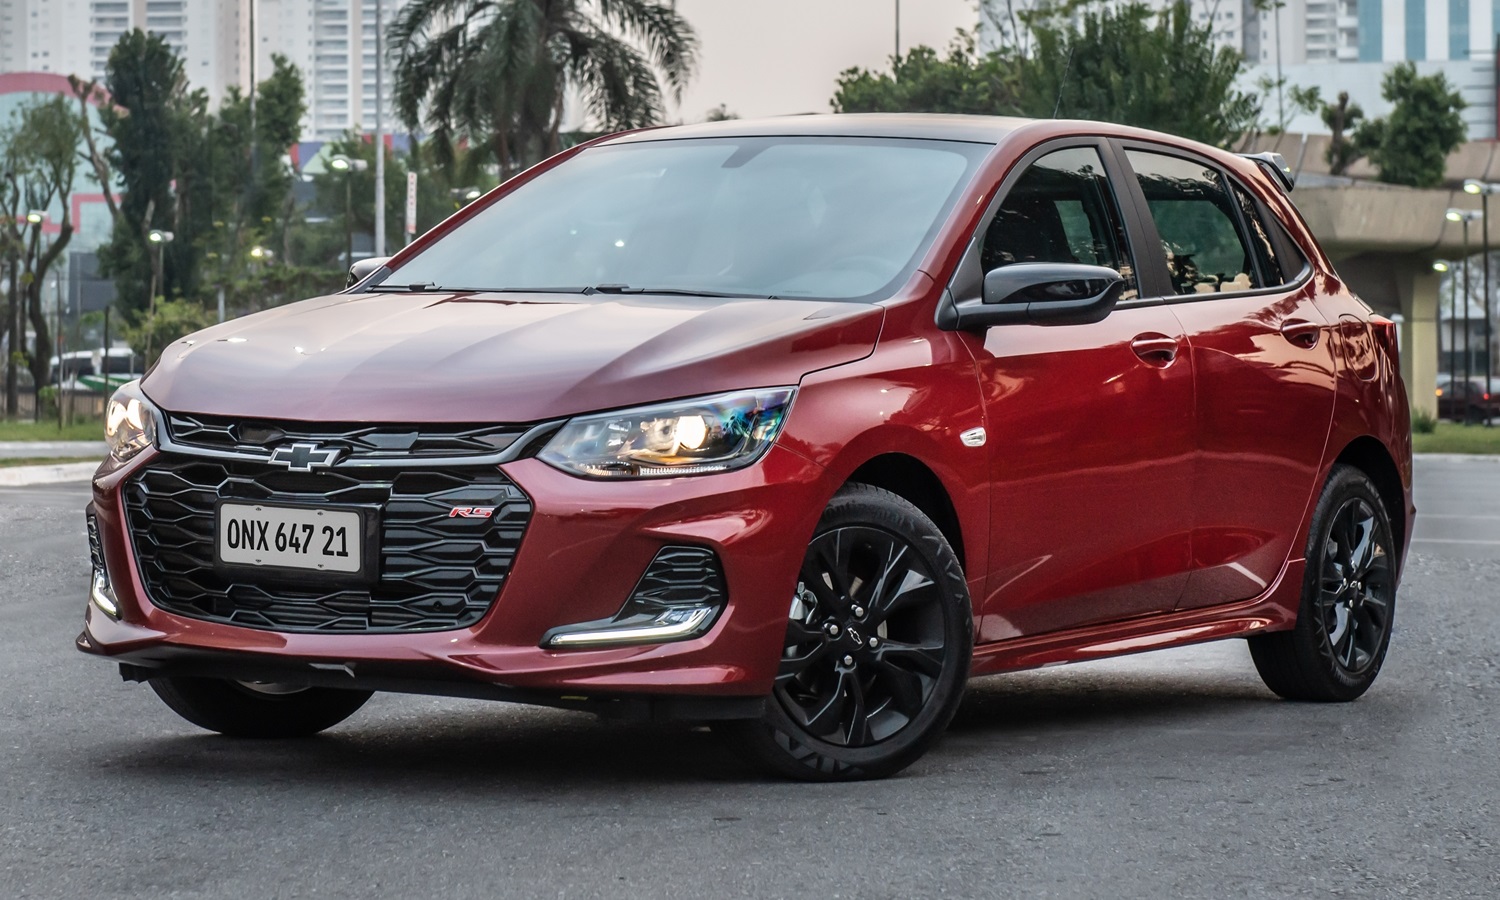 2021 Chevrolet Onix RS Officially Revealed In Brazil